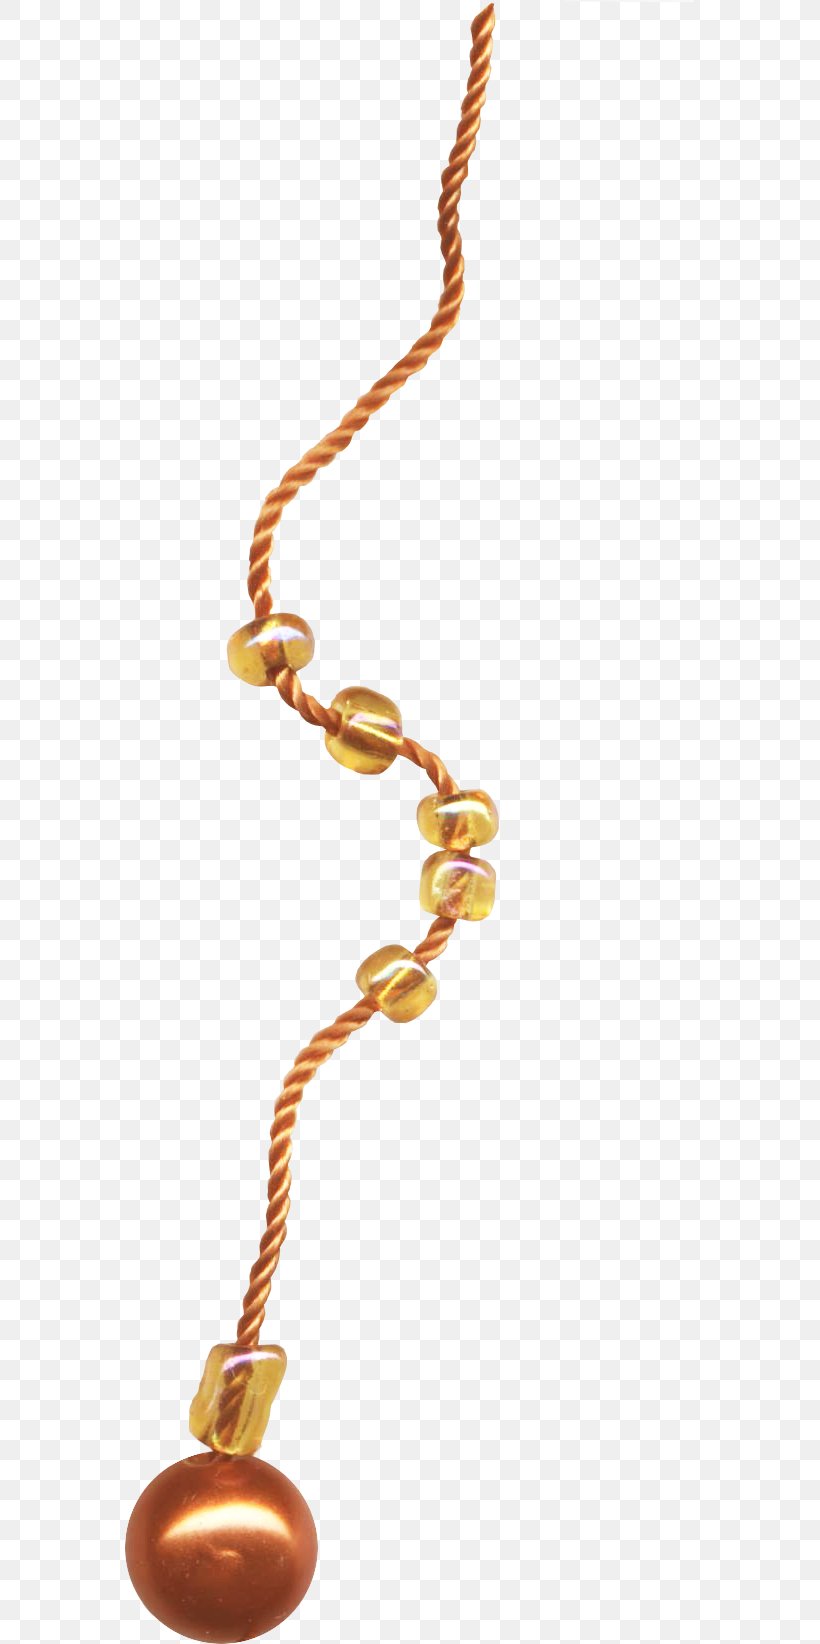 Jewellery Necklace Clip Art, PNG, 569x1644px, Jewellery, Blog, Necklace, Orange, Rope Download Free